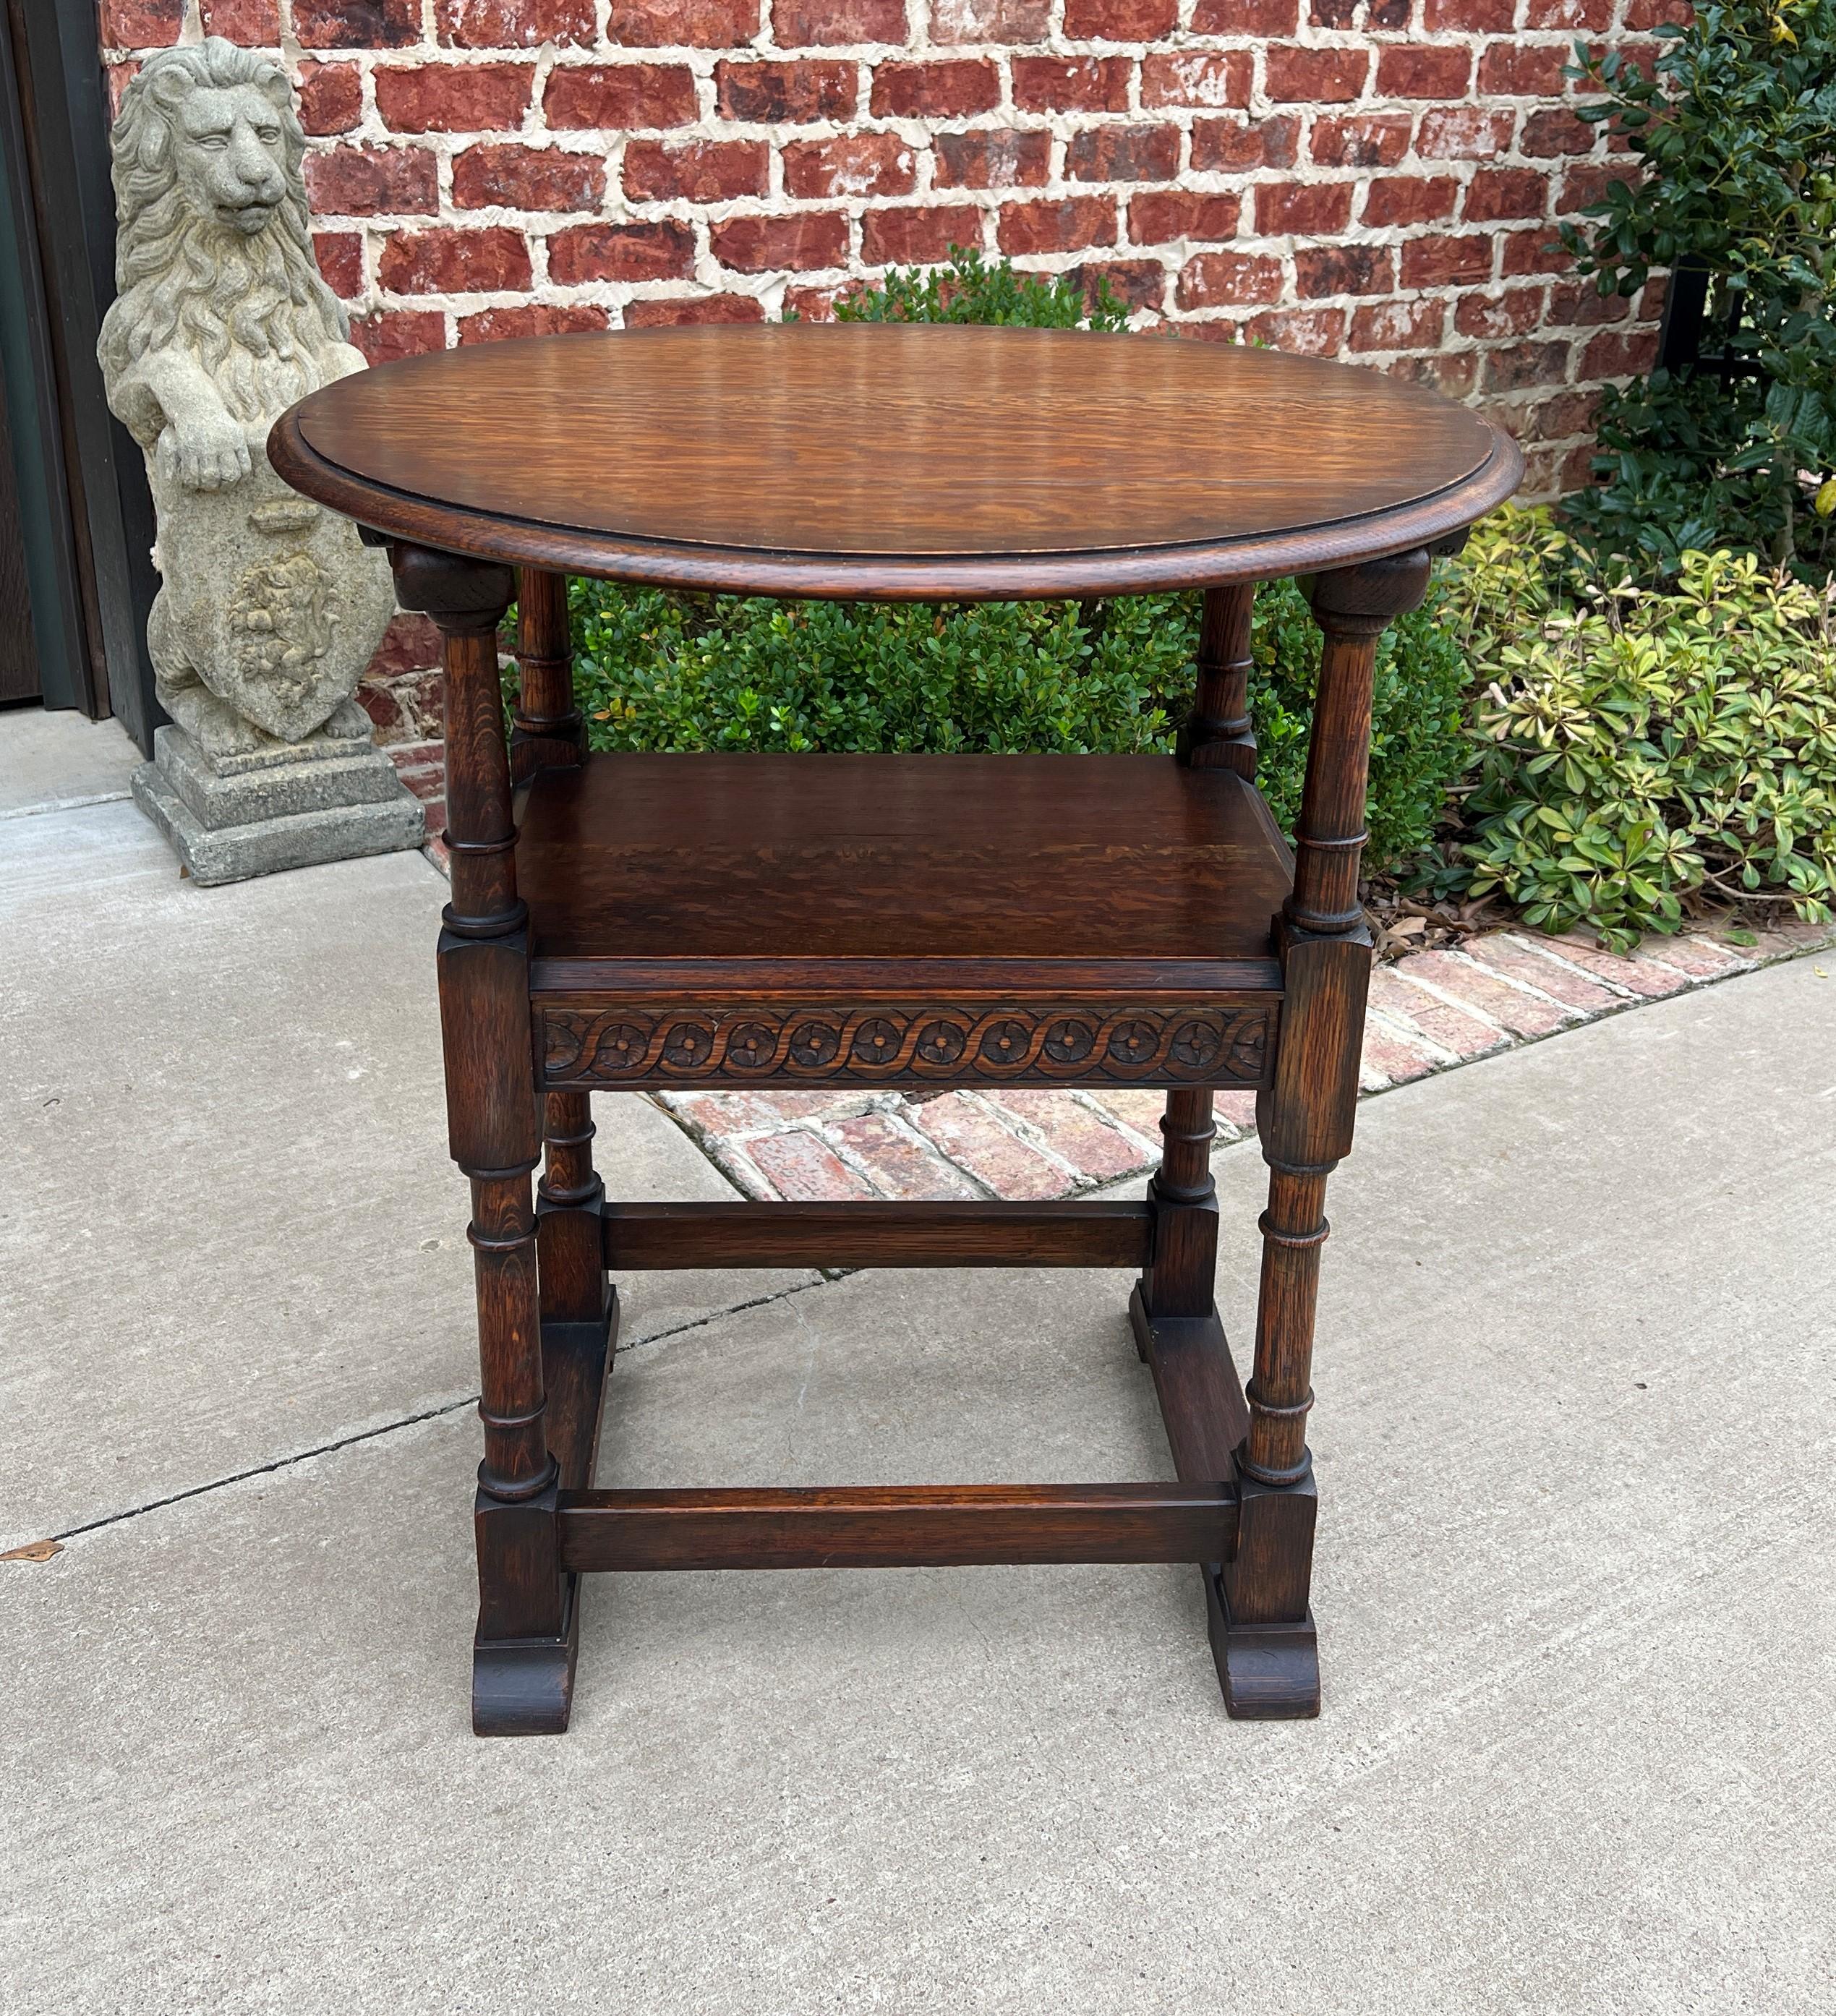 Renaissance Revival Antique English Monk's Chair Bench Oak Converts to Folding Table Round 19th C For Sale